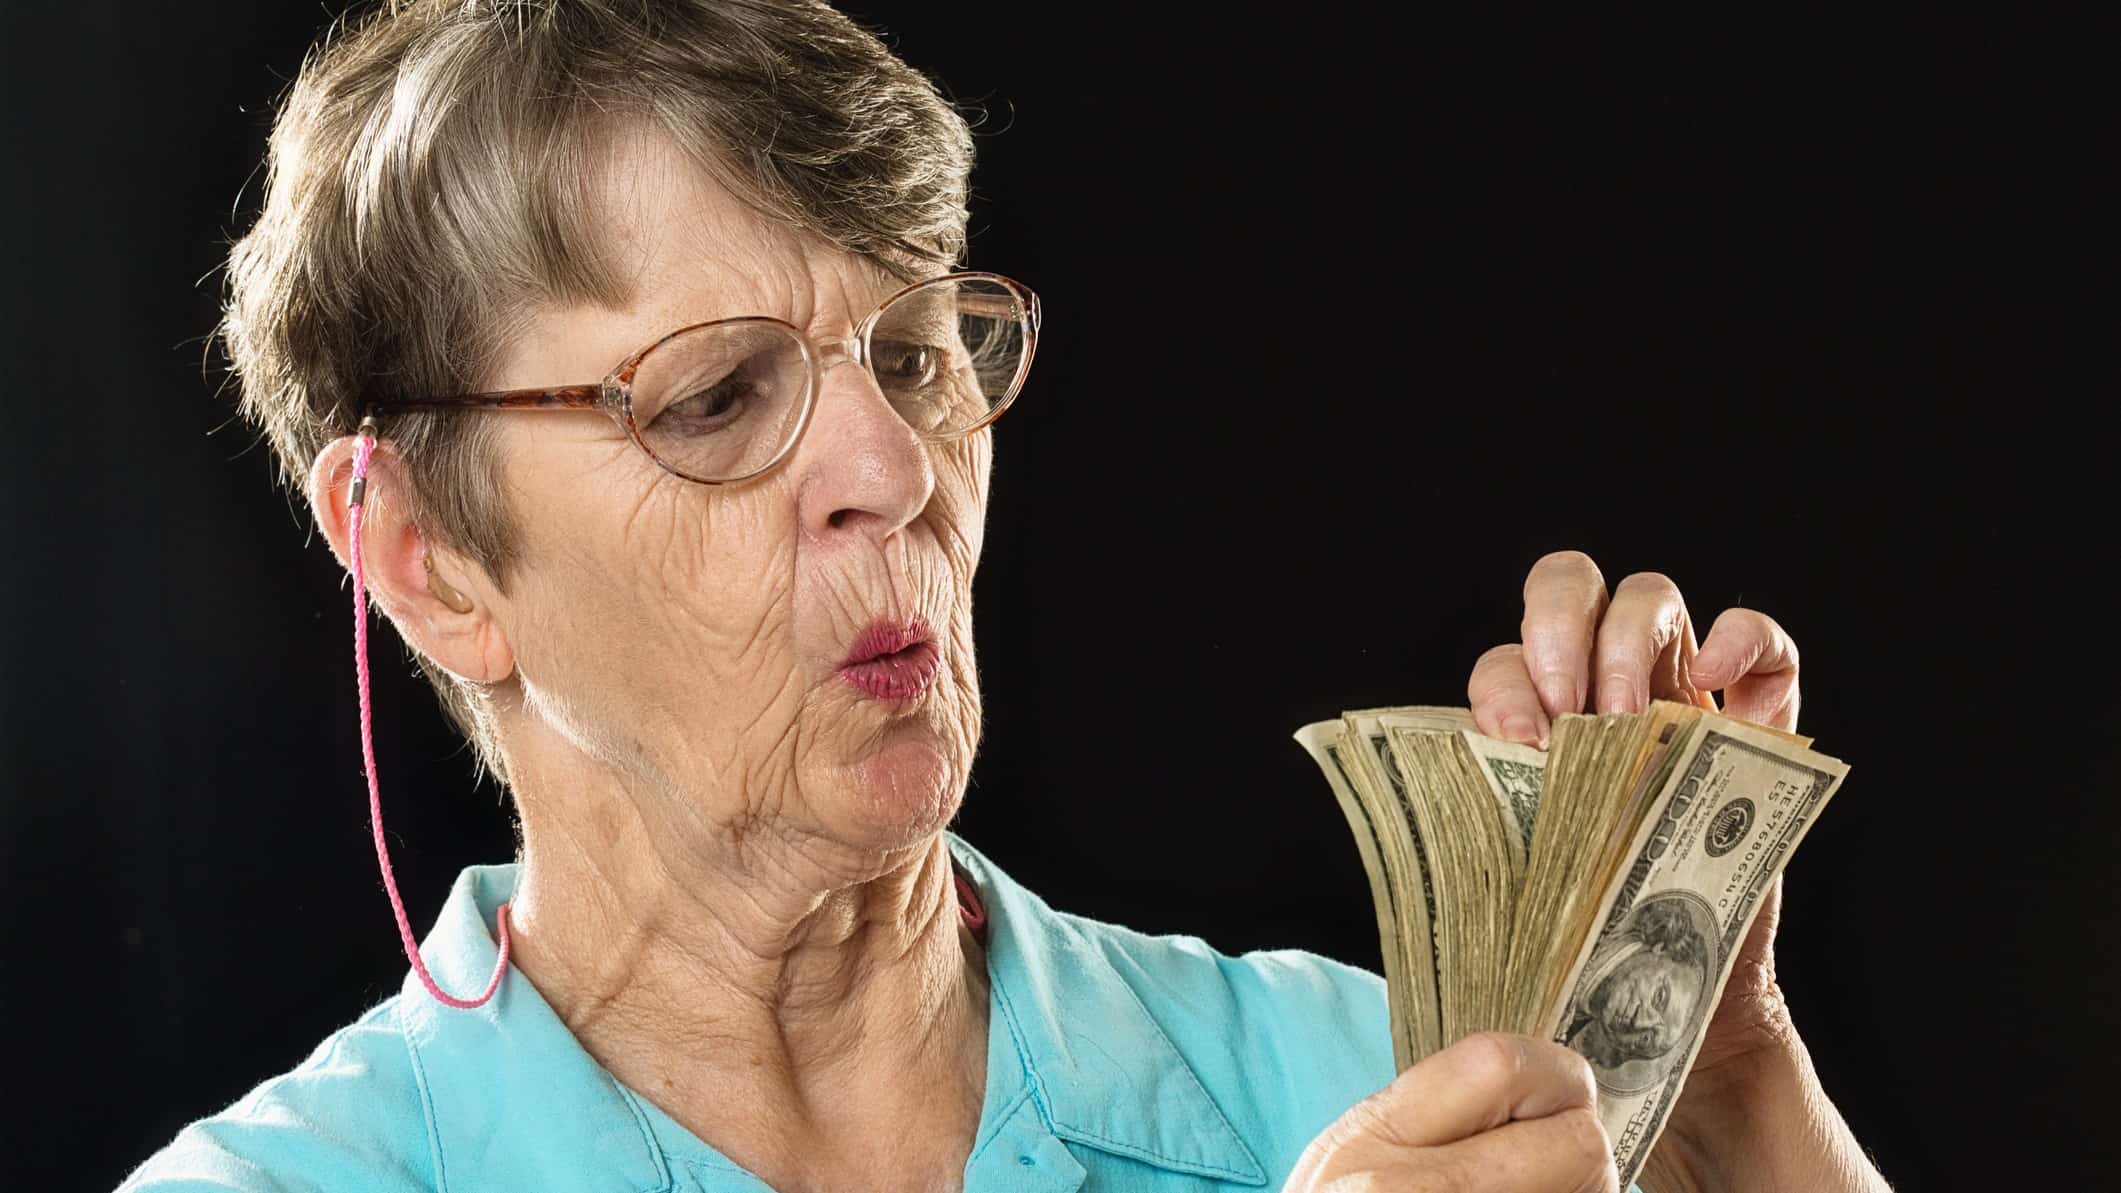 Older woman looks concerned as she counts cash notes